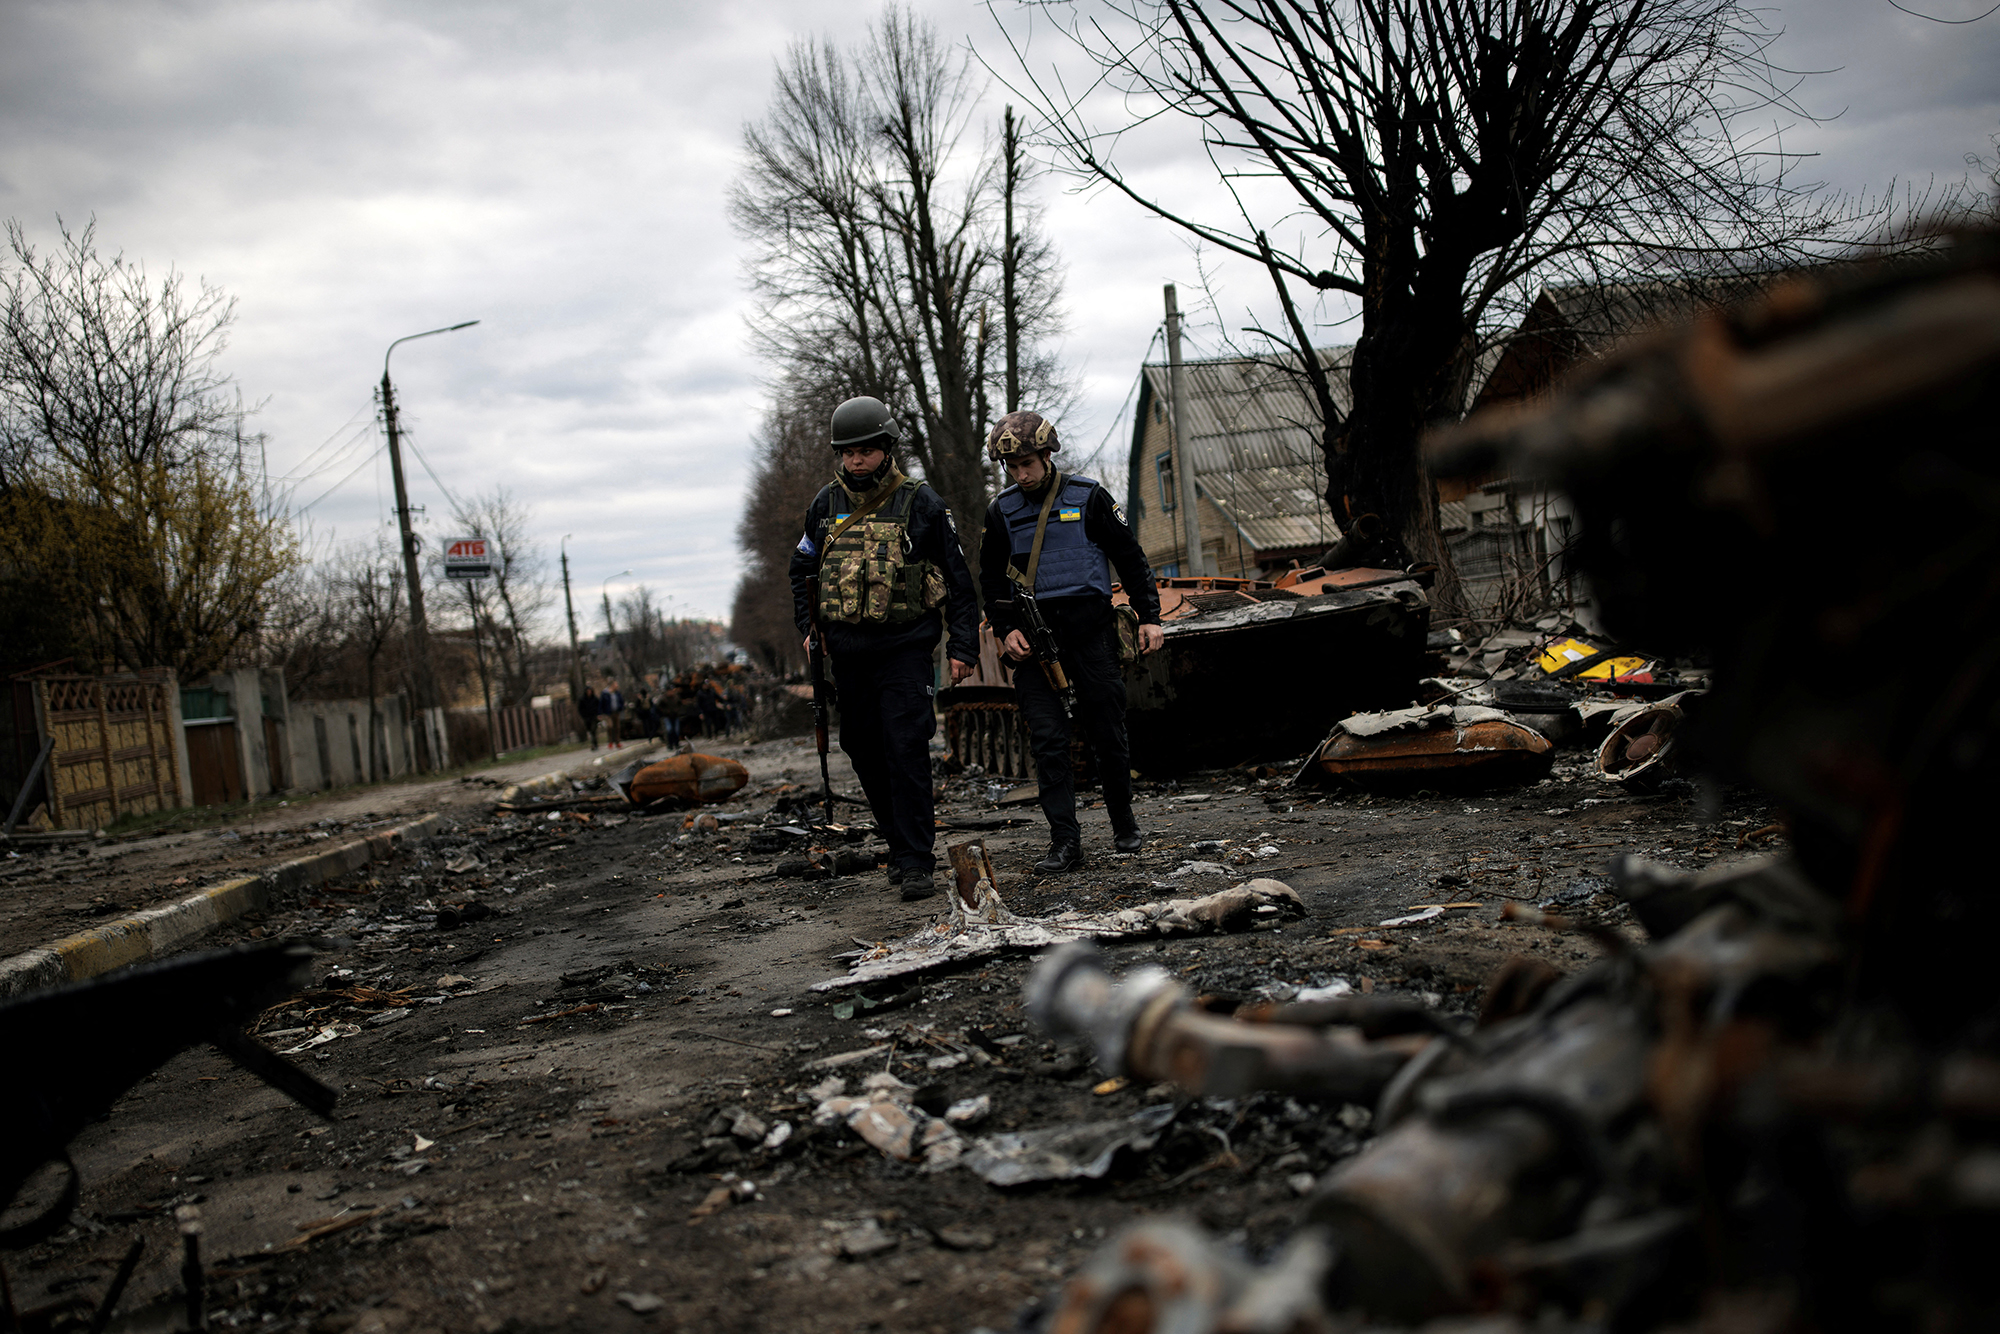 Volunteers of the Territorial Defence Forces walk next to destroyed Russian tanks and armoured vehicles in Bucha, Ukraine, on April 6.